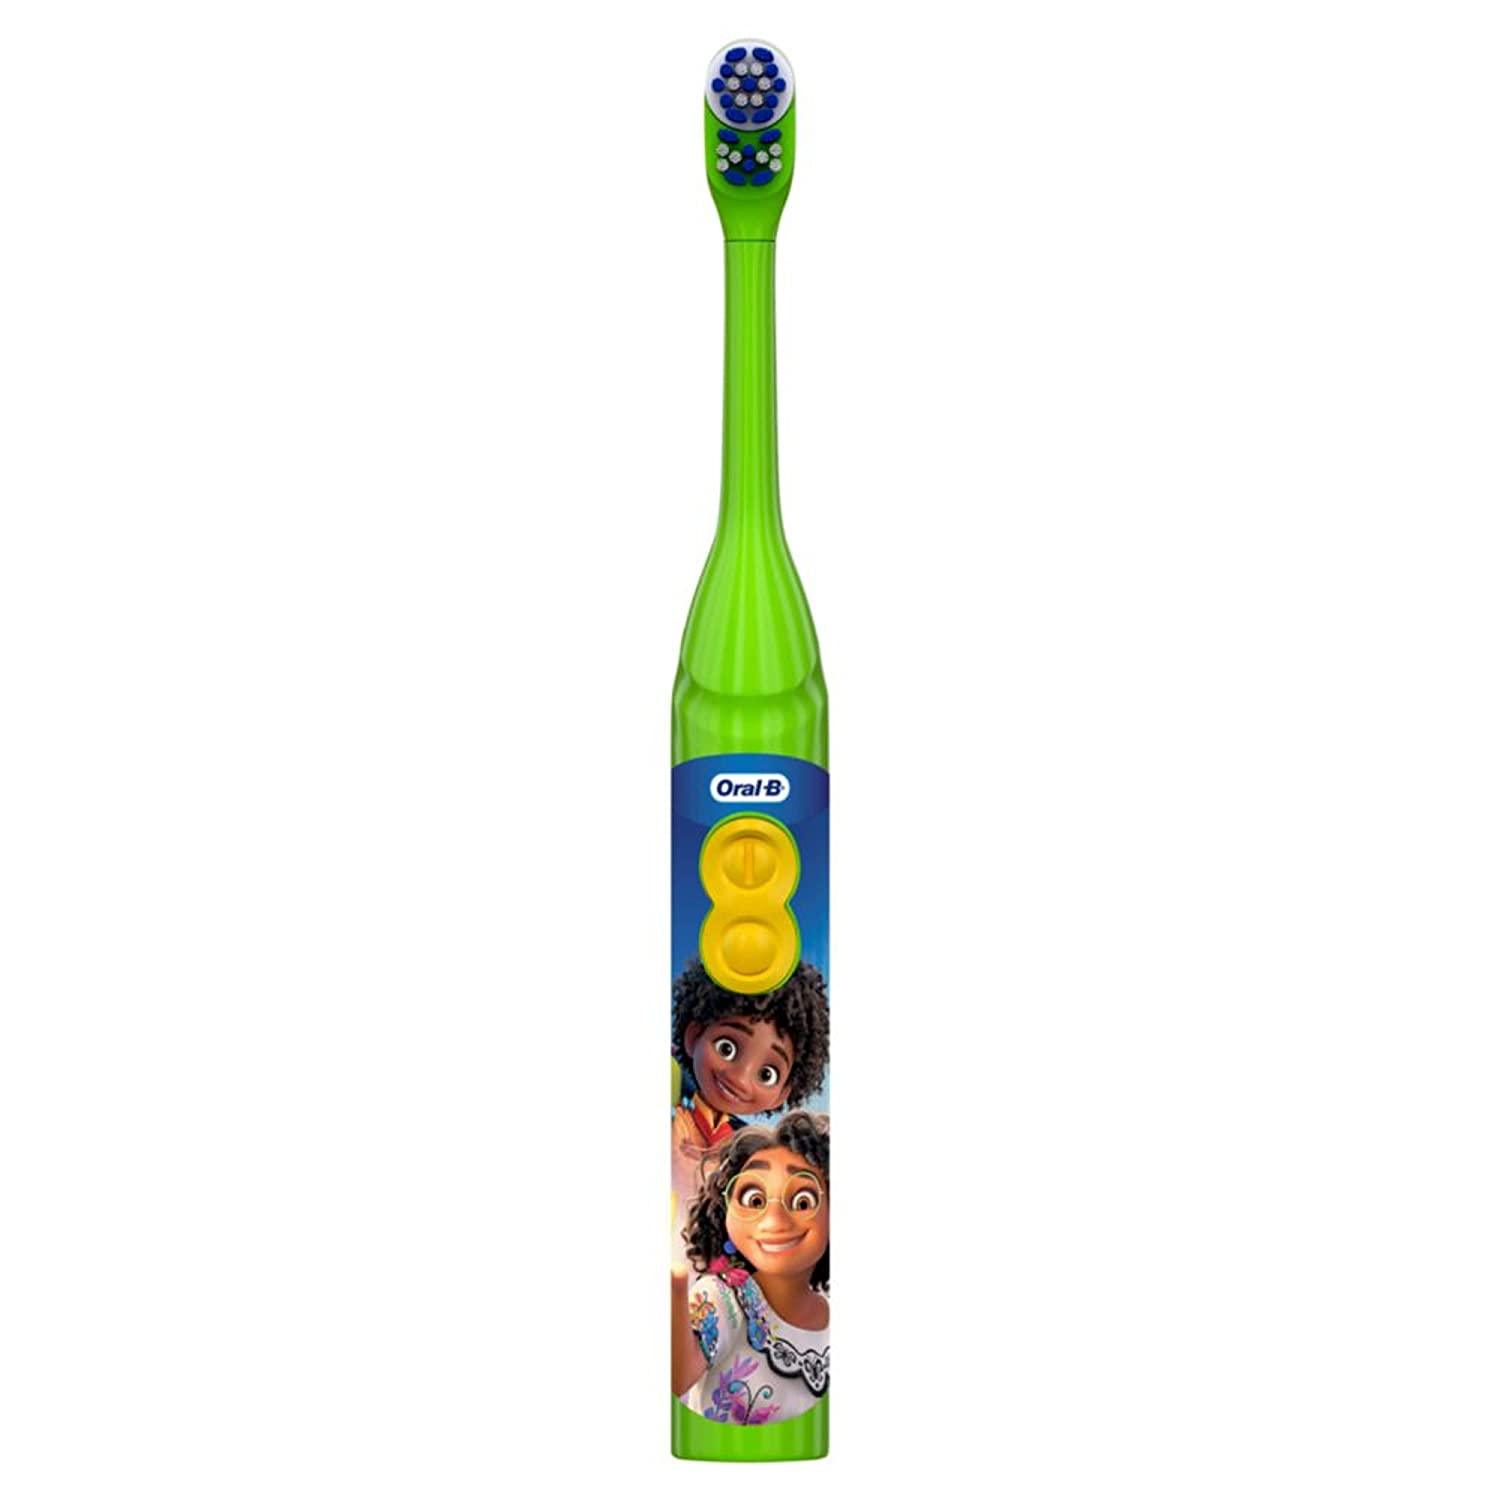 Oral-B Kid's Battery Toothbrush Featuring Disney's Encanto, Soft Bristles - BumbleToys - 5-7 Years, Baby Saftey & Health, Girls, Oral-B, Pre-Order, Toothbrush